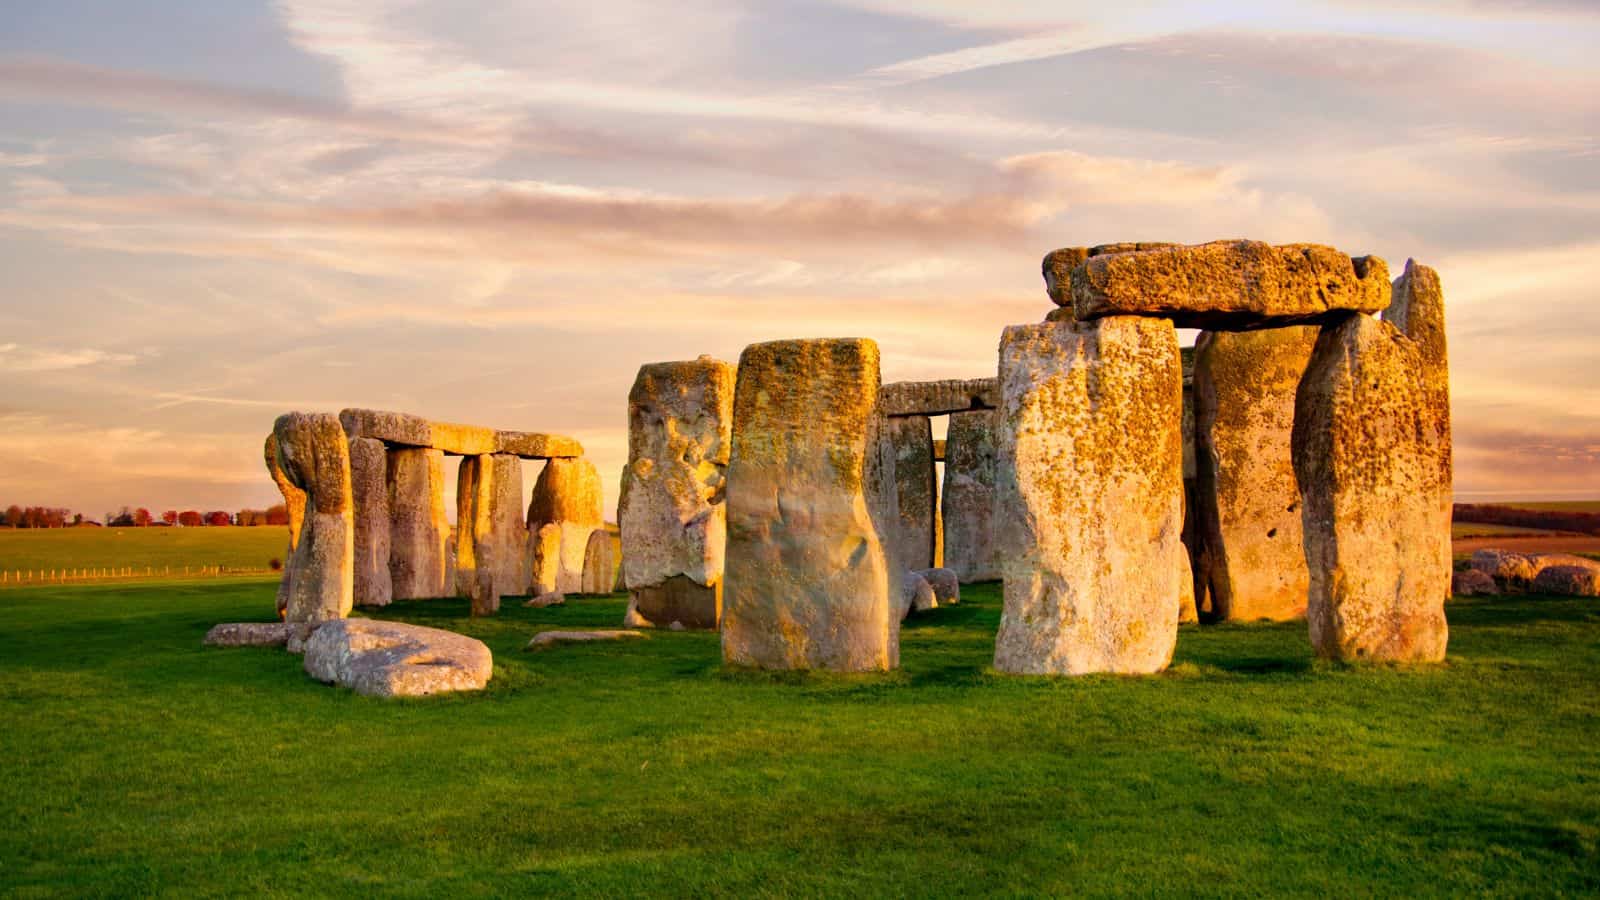 <p><a href="https://www.bbc.co.uk/england/sevenwonders/south/stonehenge_mm/index.shtml#:~:text=Stonehenge%20is%20one%20of%20the,the%20Preseli%20Mountains%20in%20Wales.">The BBC</a> calls this Salisbury Plain monument one of the most famous wonders of the ancient world and writes, “No one knows for certain the reason why Stonehenge was built. The stones that form the inner ring came from the Preseli Mountains in Wales.” The stones, each 13 feet high, were transported 150 miles and erected by prehistoric peoples without modern tools!</p>